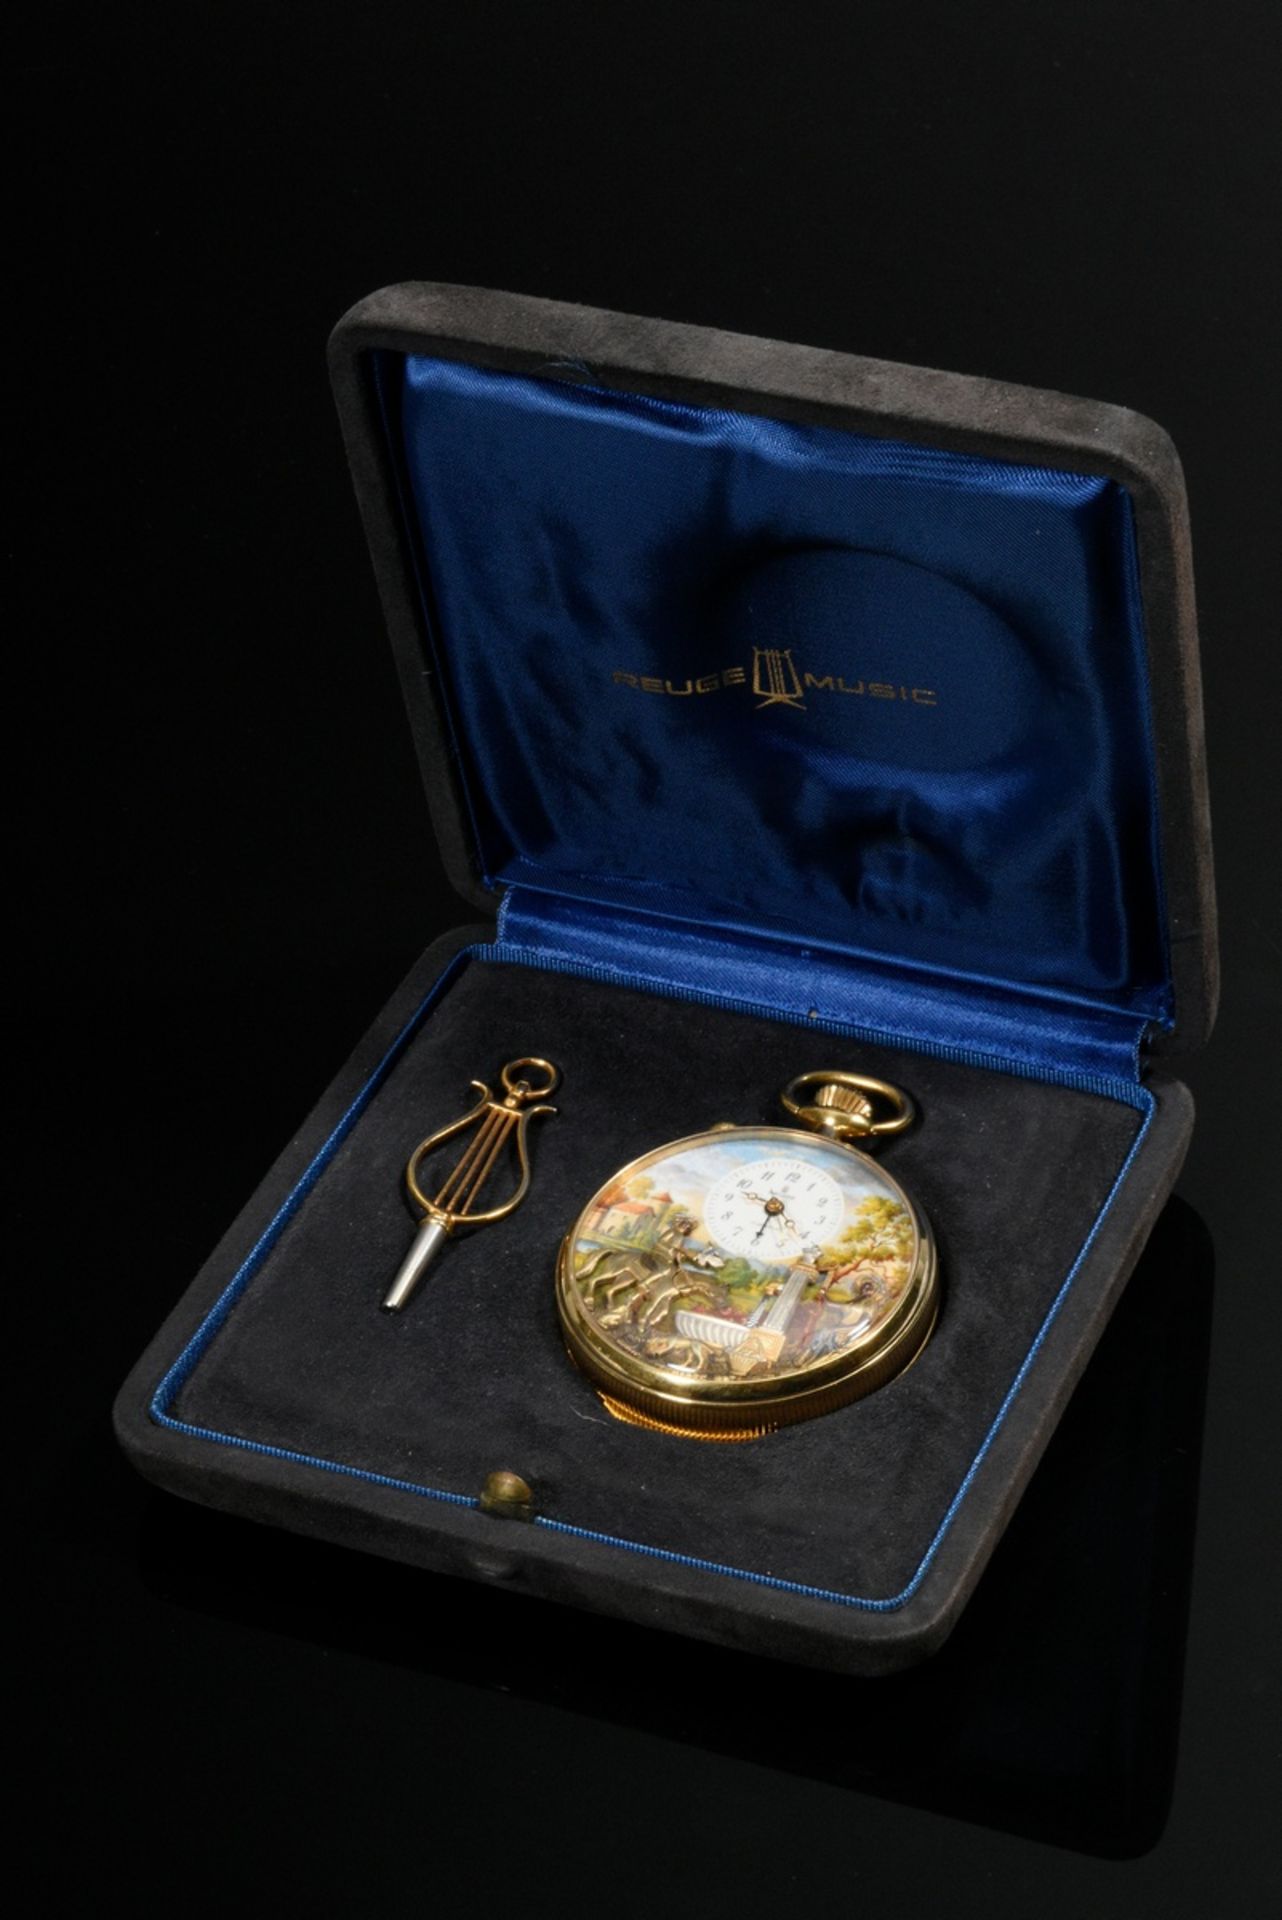 Reuge music pocket watch with alarm clock, music box and figurine automaton in silver-gilt case wit - Image 10 of 10